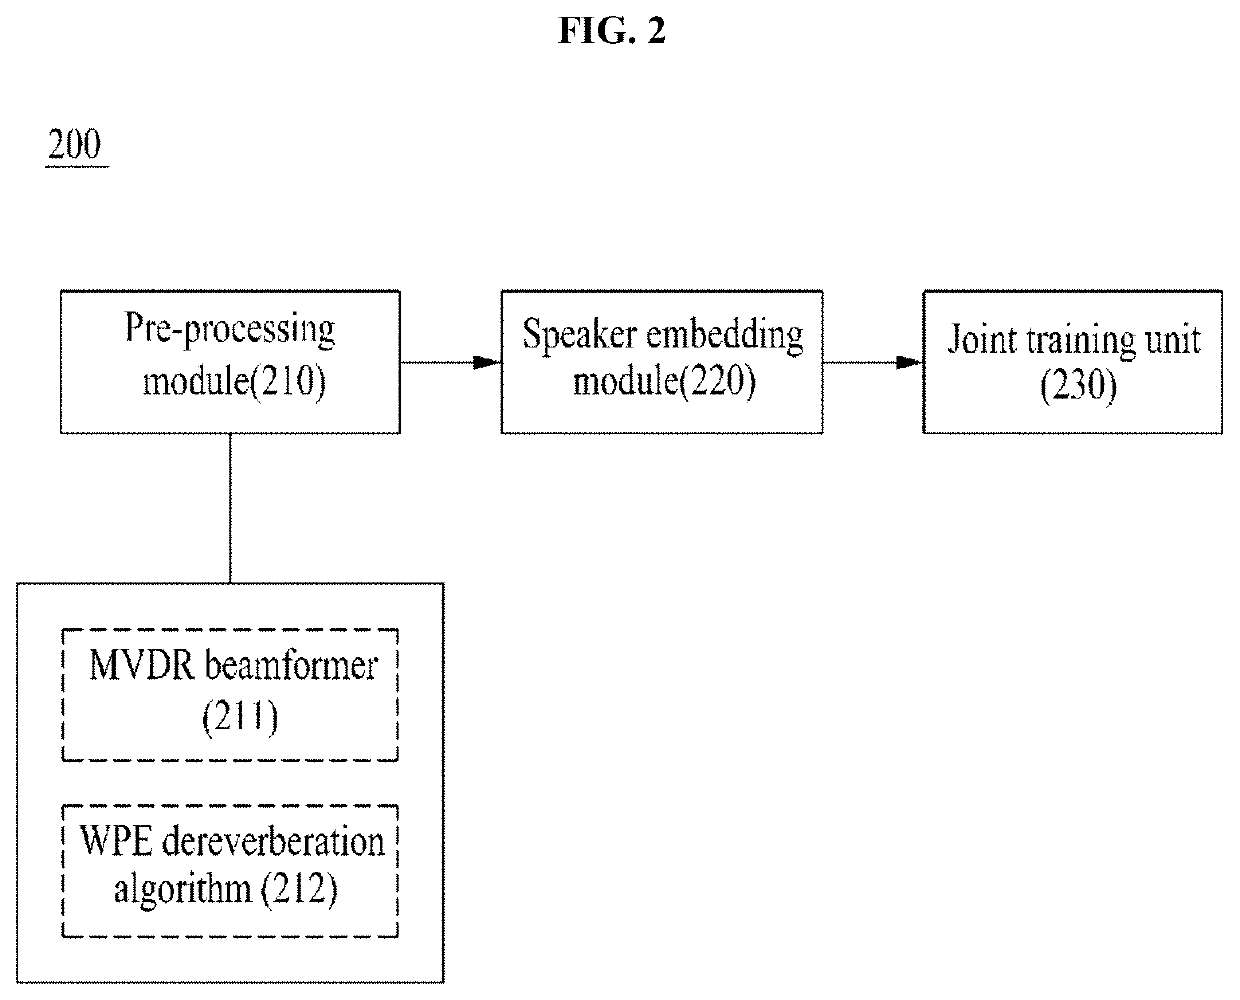 Method and apparatus for combined learning using feature enhancement based on deep neural network and modified loss function for speaker recognition robust to noisy environments